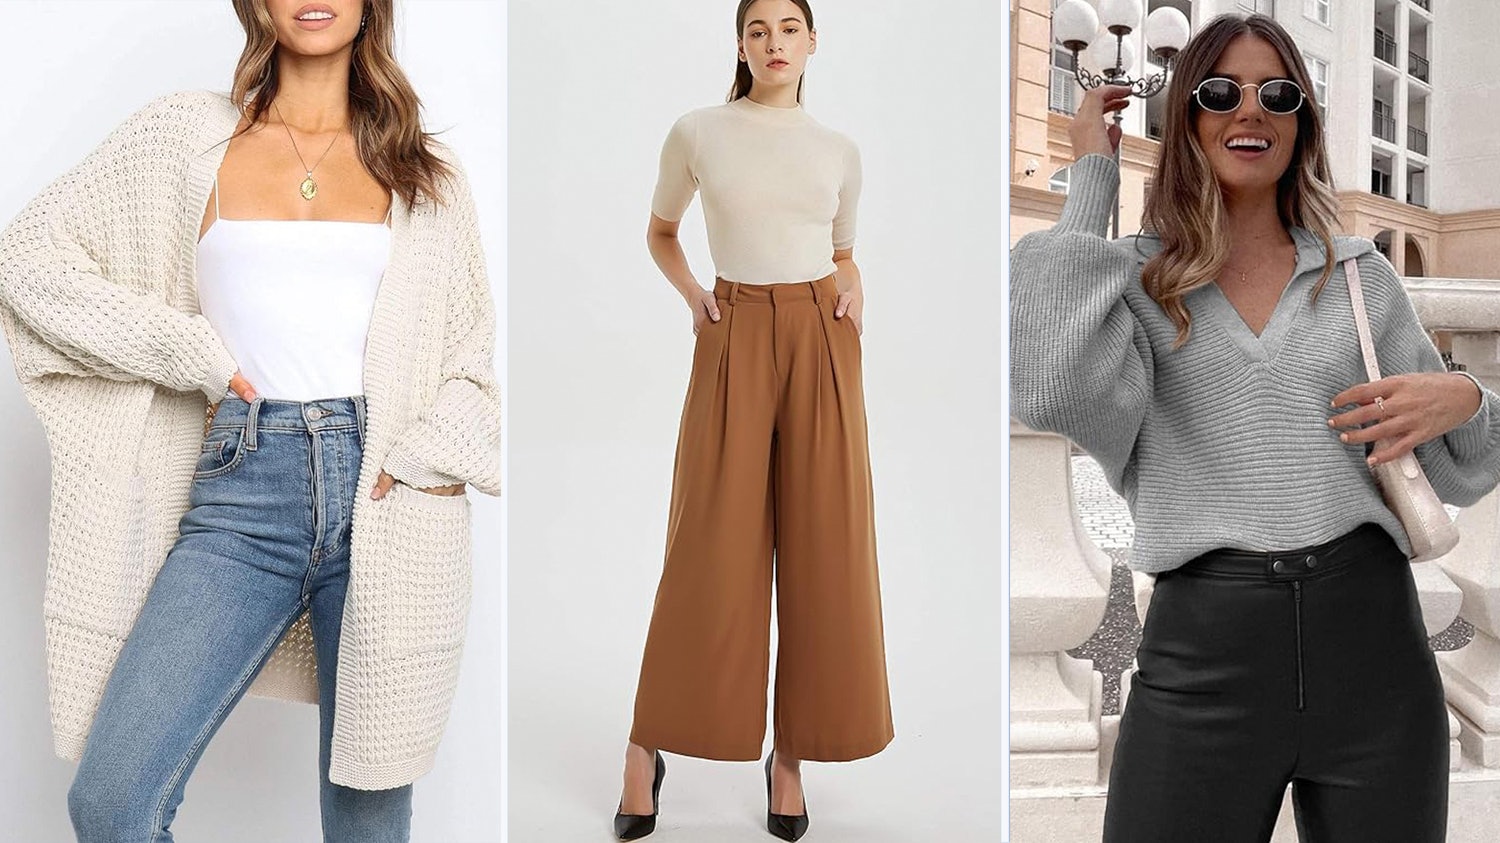 If You're Cheap But Want To Look Good, Check Out These 50 Awesome Finds On